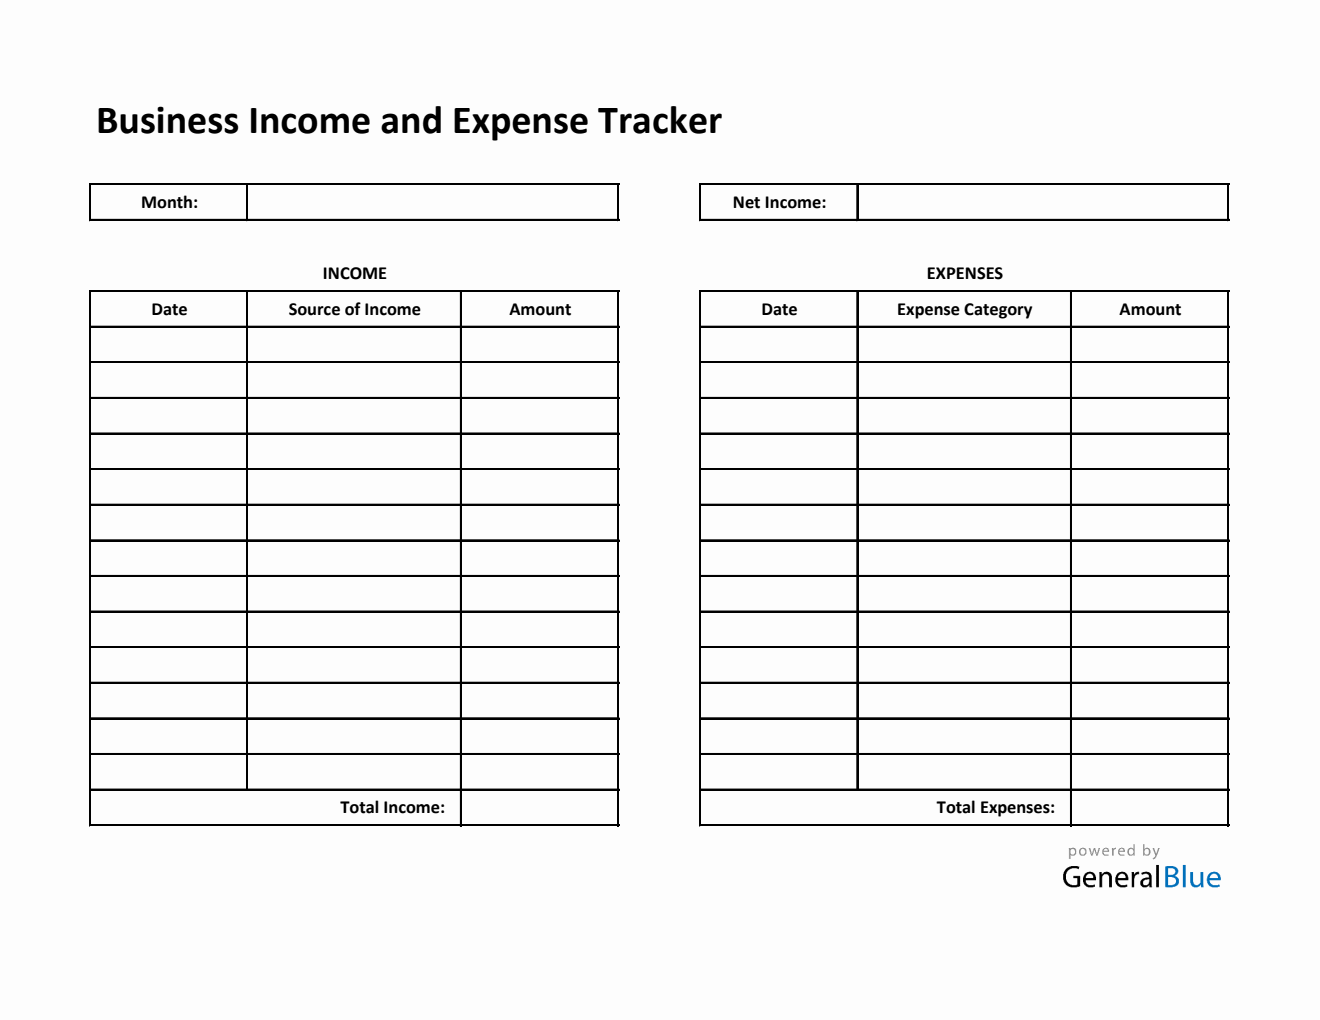 Free Business Income and Expense Tracker in Excel (Printable)